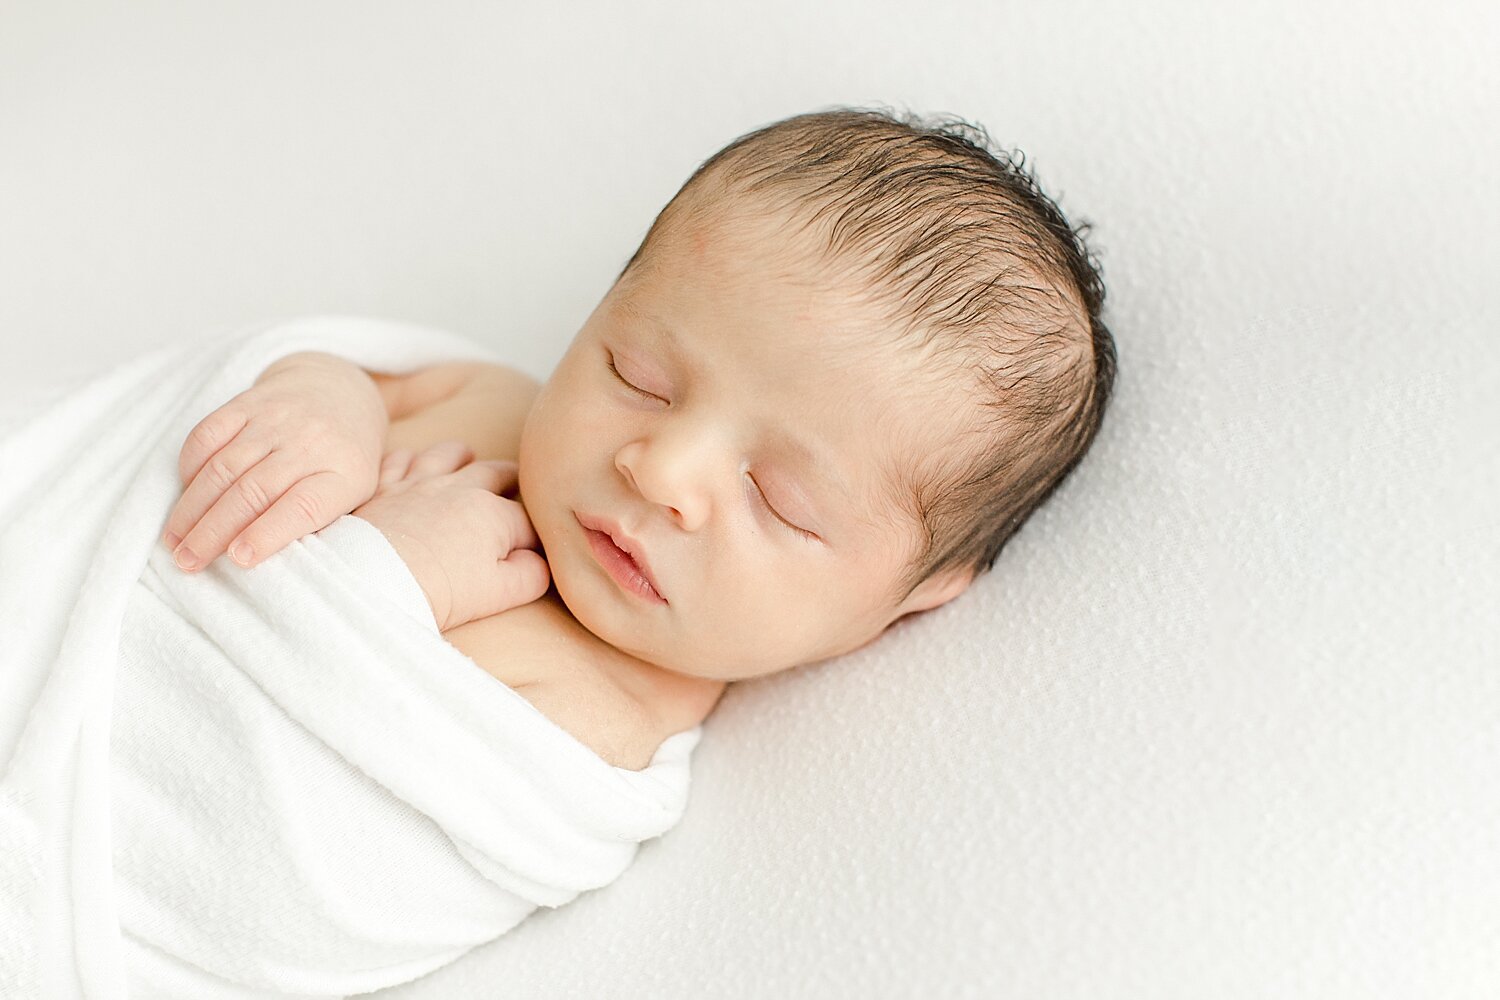 Newborn baby sleeping swaddled in white. Photo by Kristin Wood Photography.